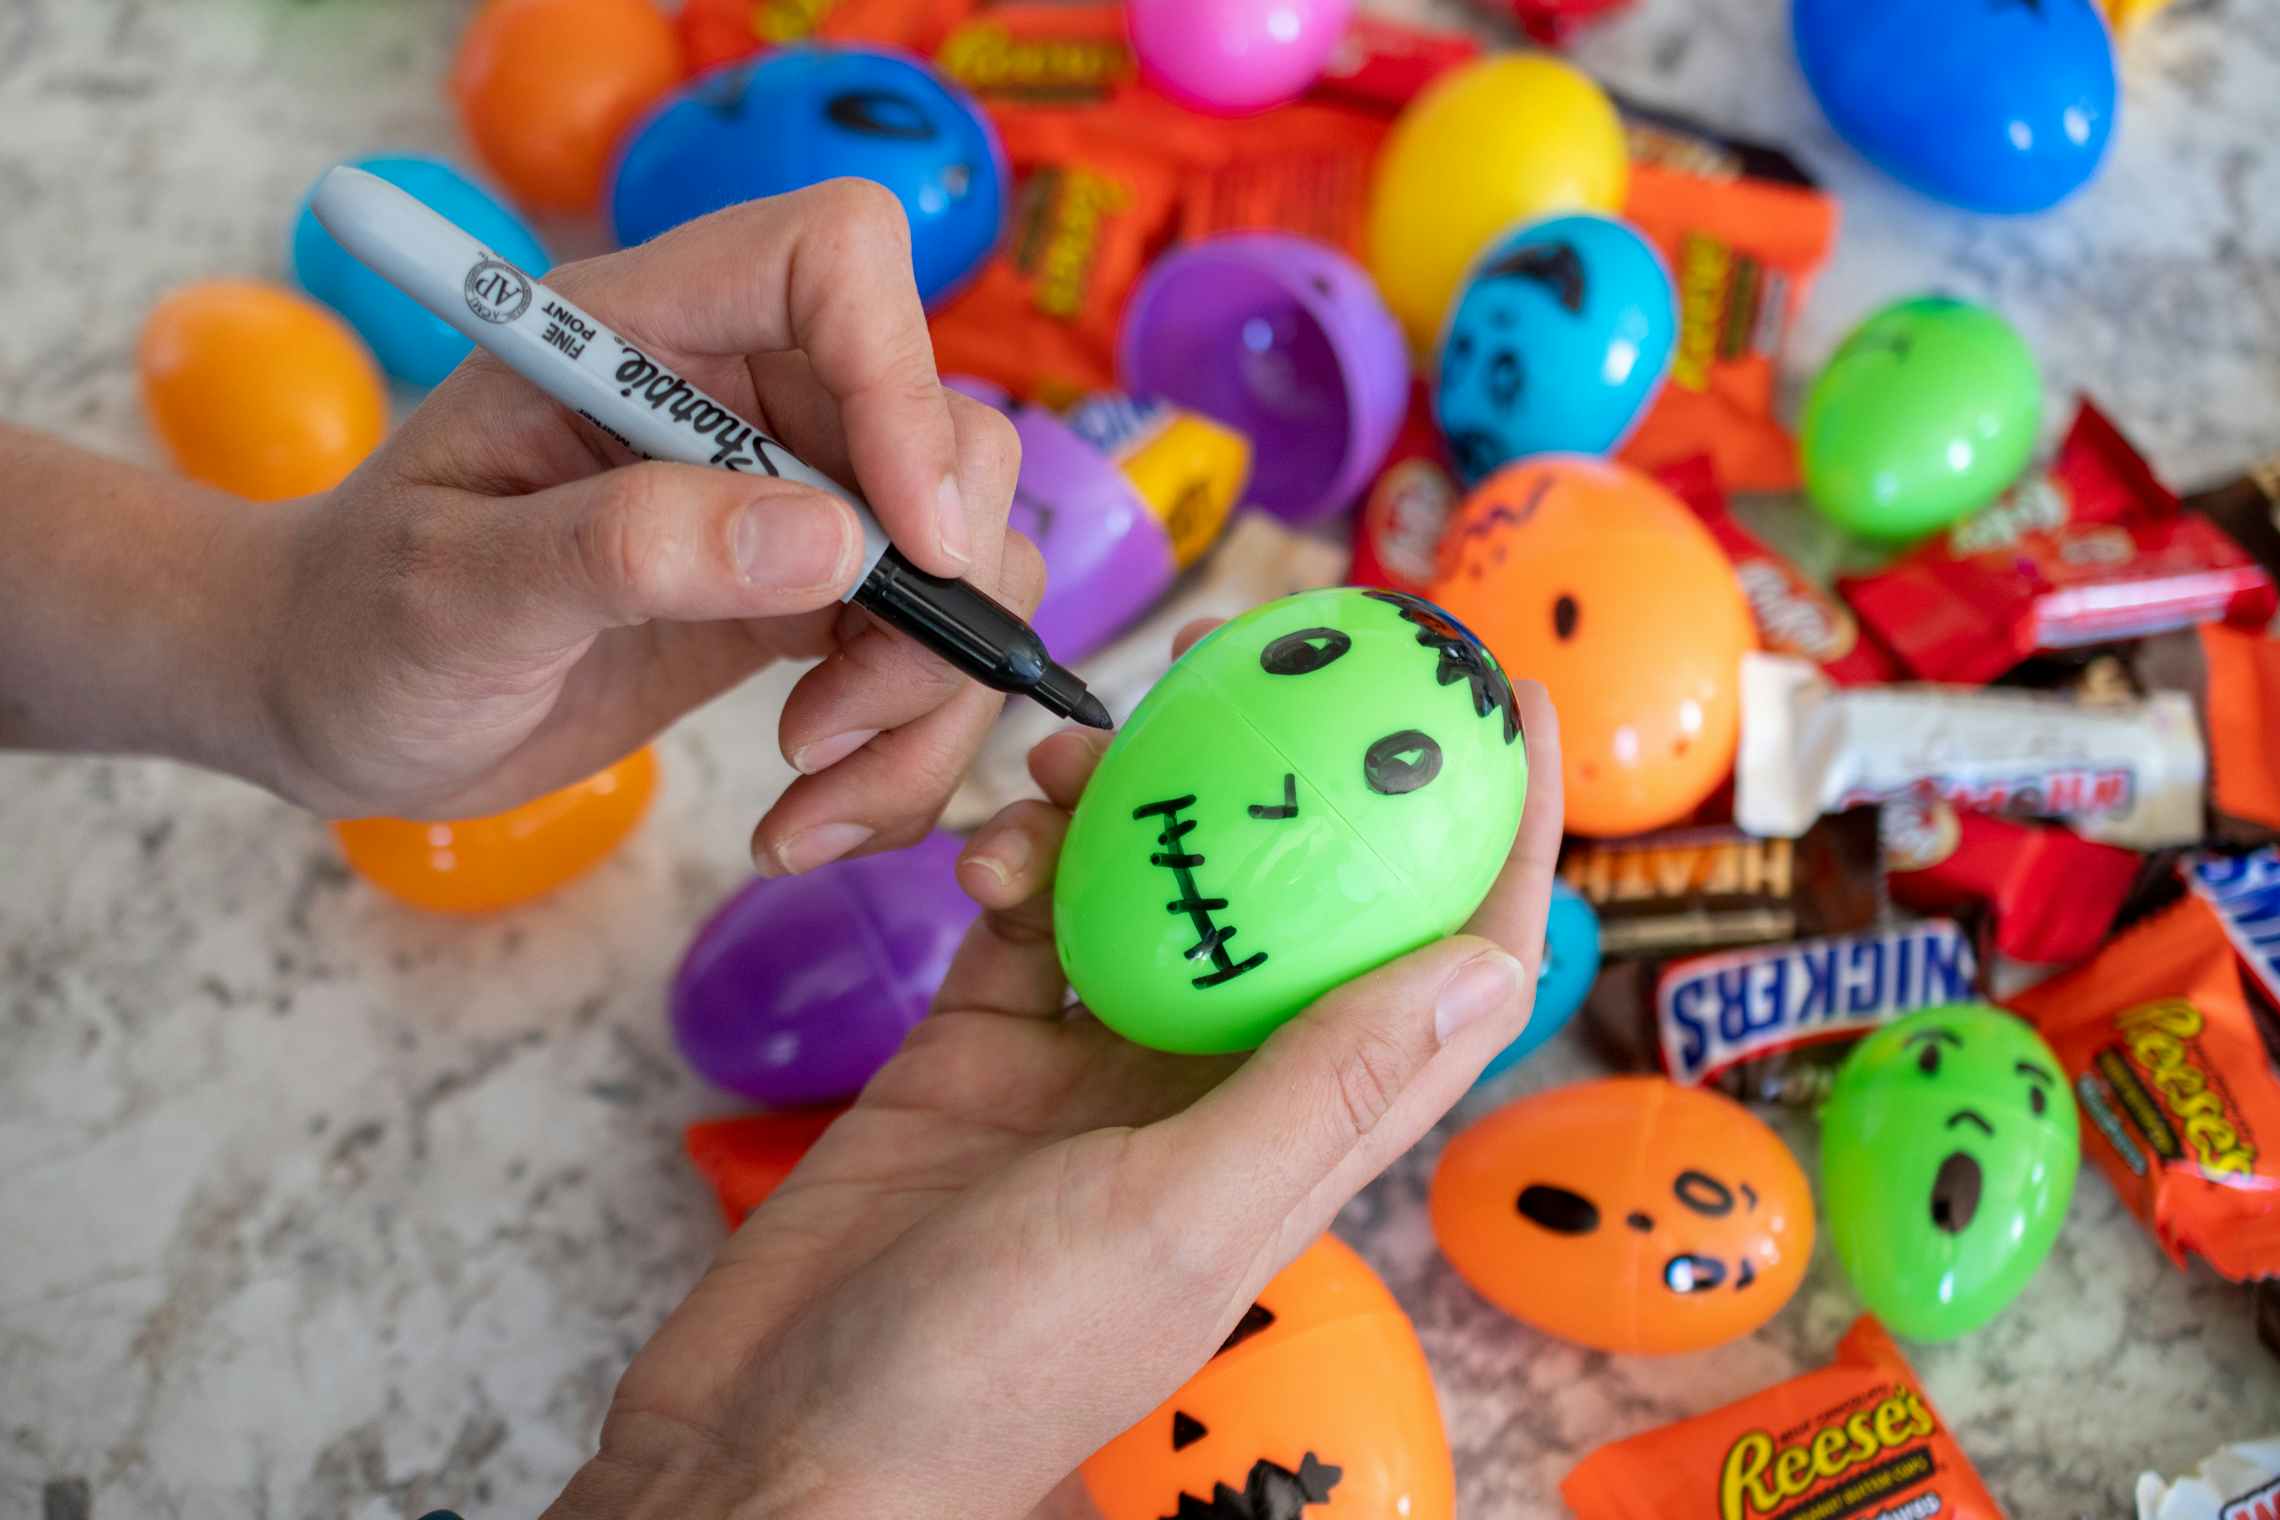 A woman using a sharpie to draw monster faces on plastic Easter eggs.